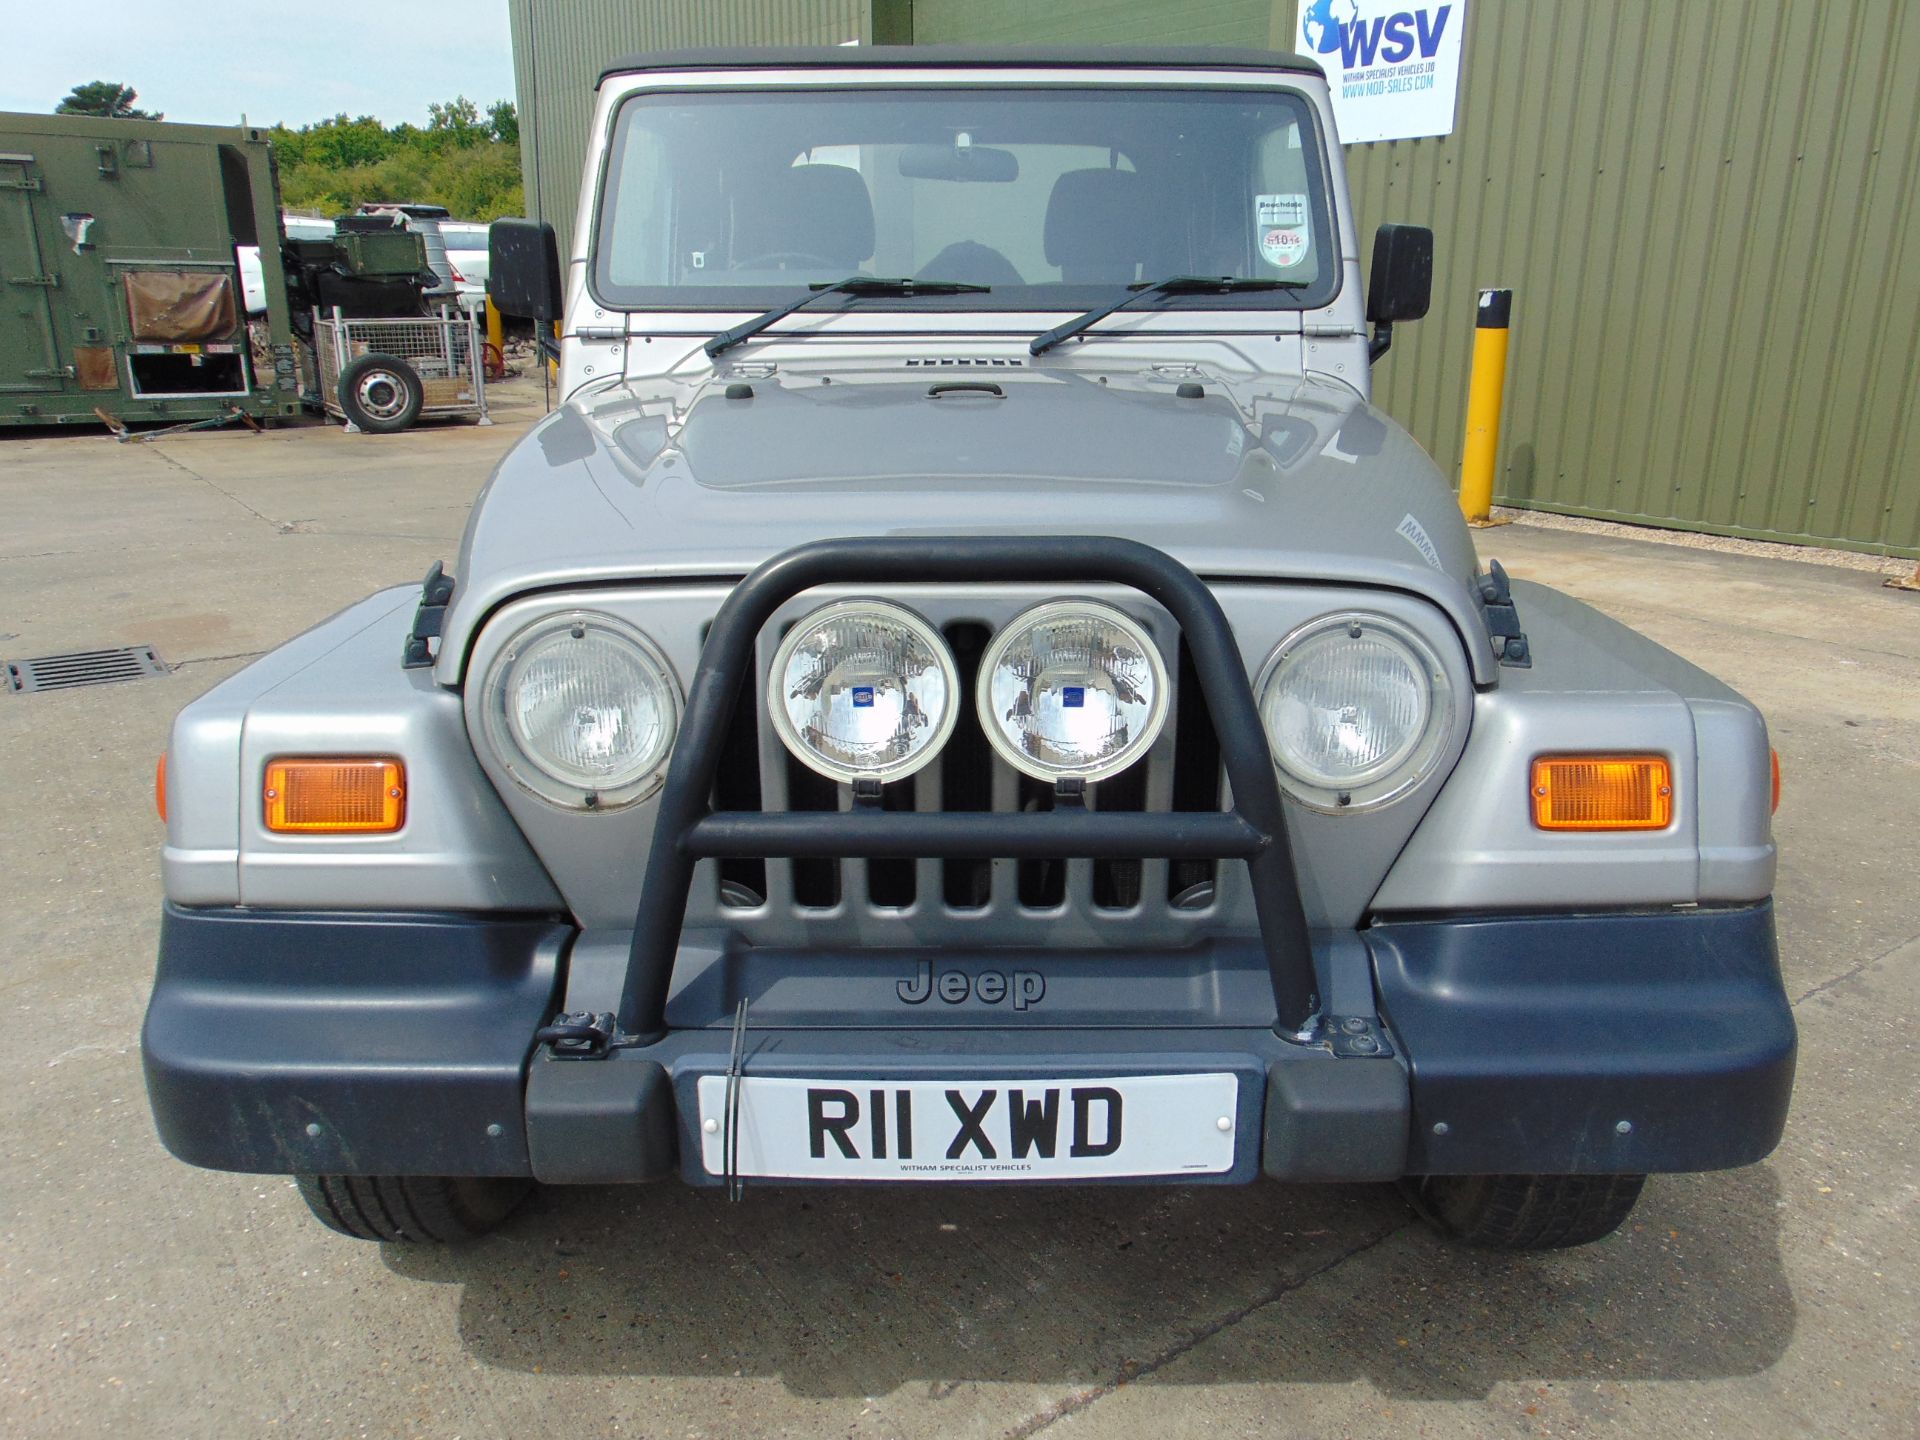 Stunning 2001 Jeep Wrangler 60TH Anniversary 4.0L Great 4X4 Iconic Classic ONLY 17,613 Miles! - Image 4 of 23